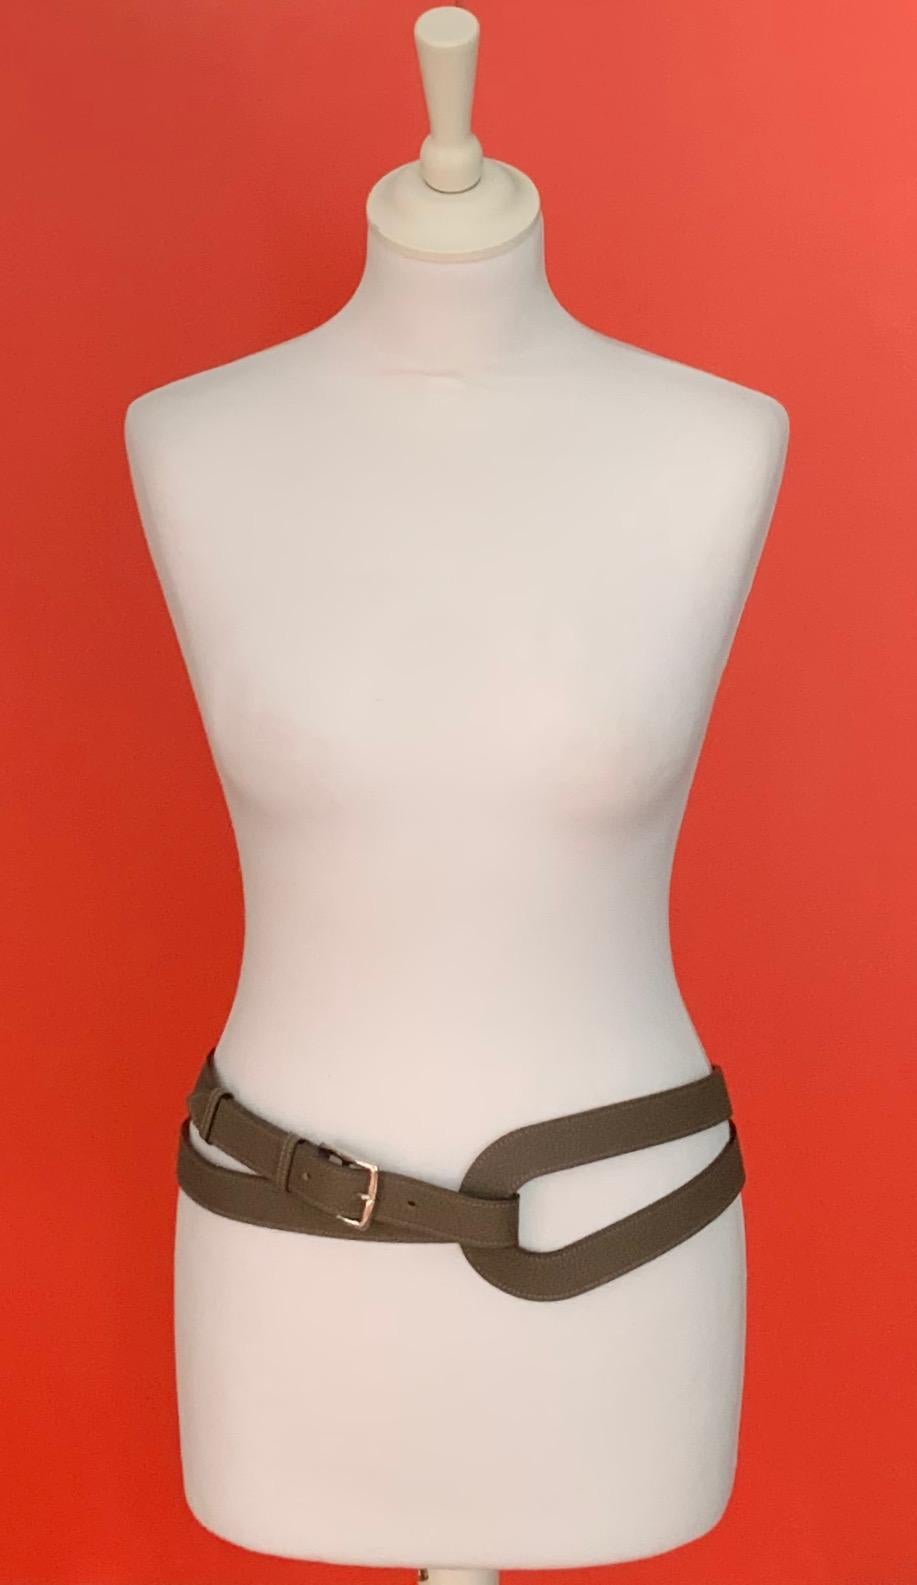 This pre-owned but new Double Tour belt model Circuit from Hermès has been designed by Jean-Paul Gaultier when he was the Artistic Director for the house.
It is crafted in a beautiful togo leather in Étoupe color with the buckle model Etriviere.